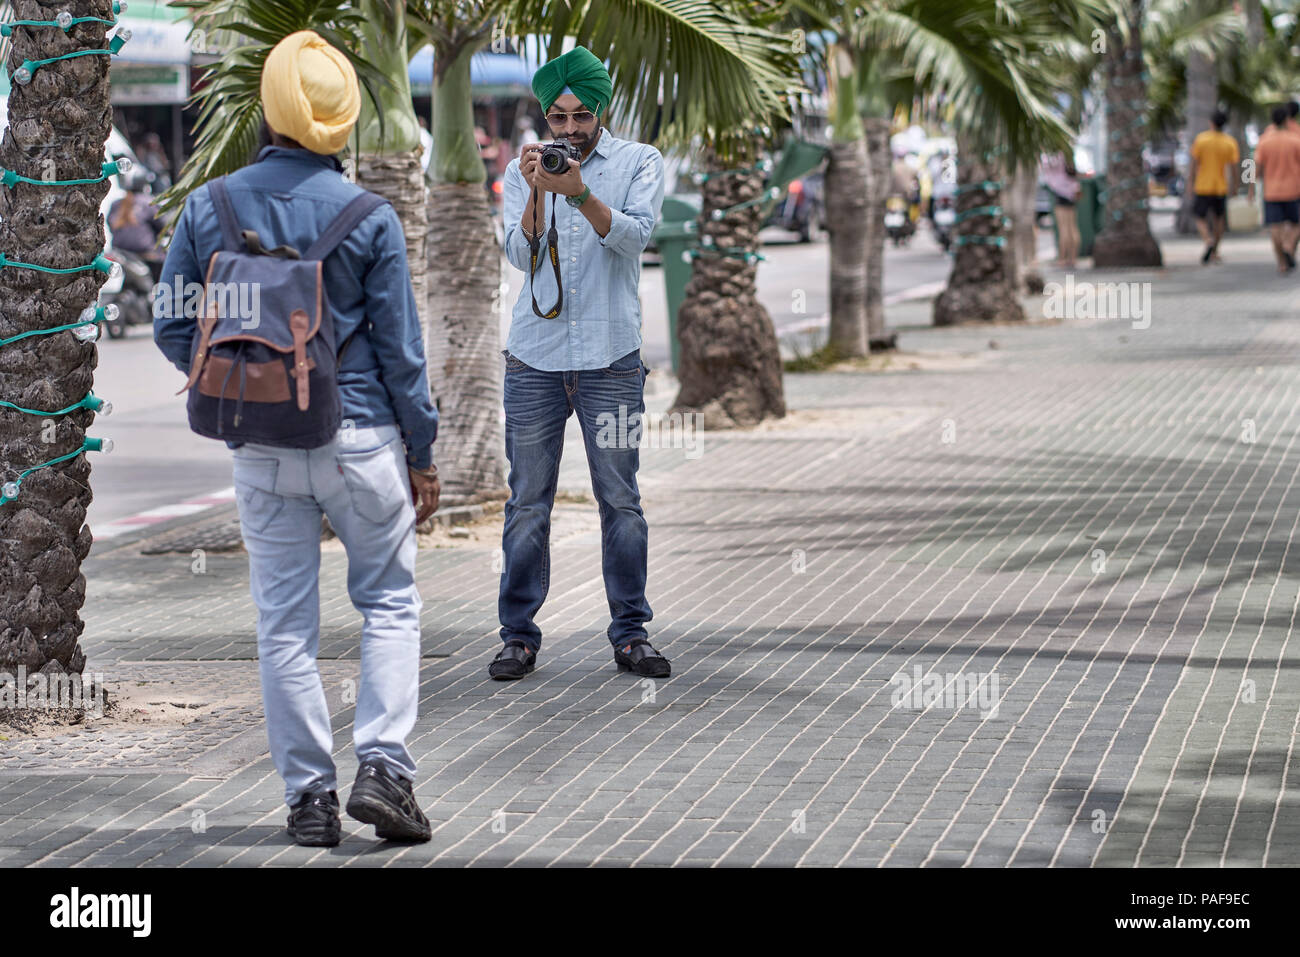 Indian Sikh man taking a photograph of his Sikh friend on the street Stock Photo